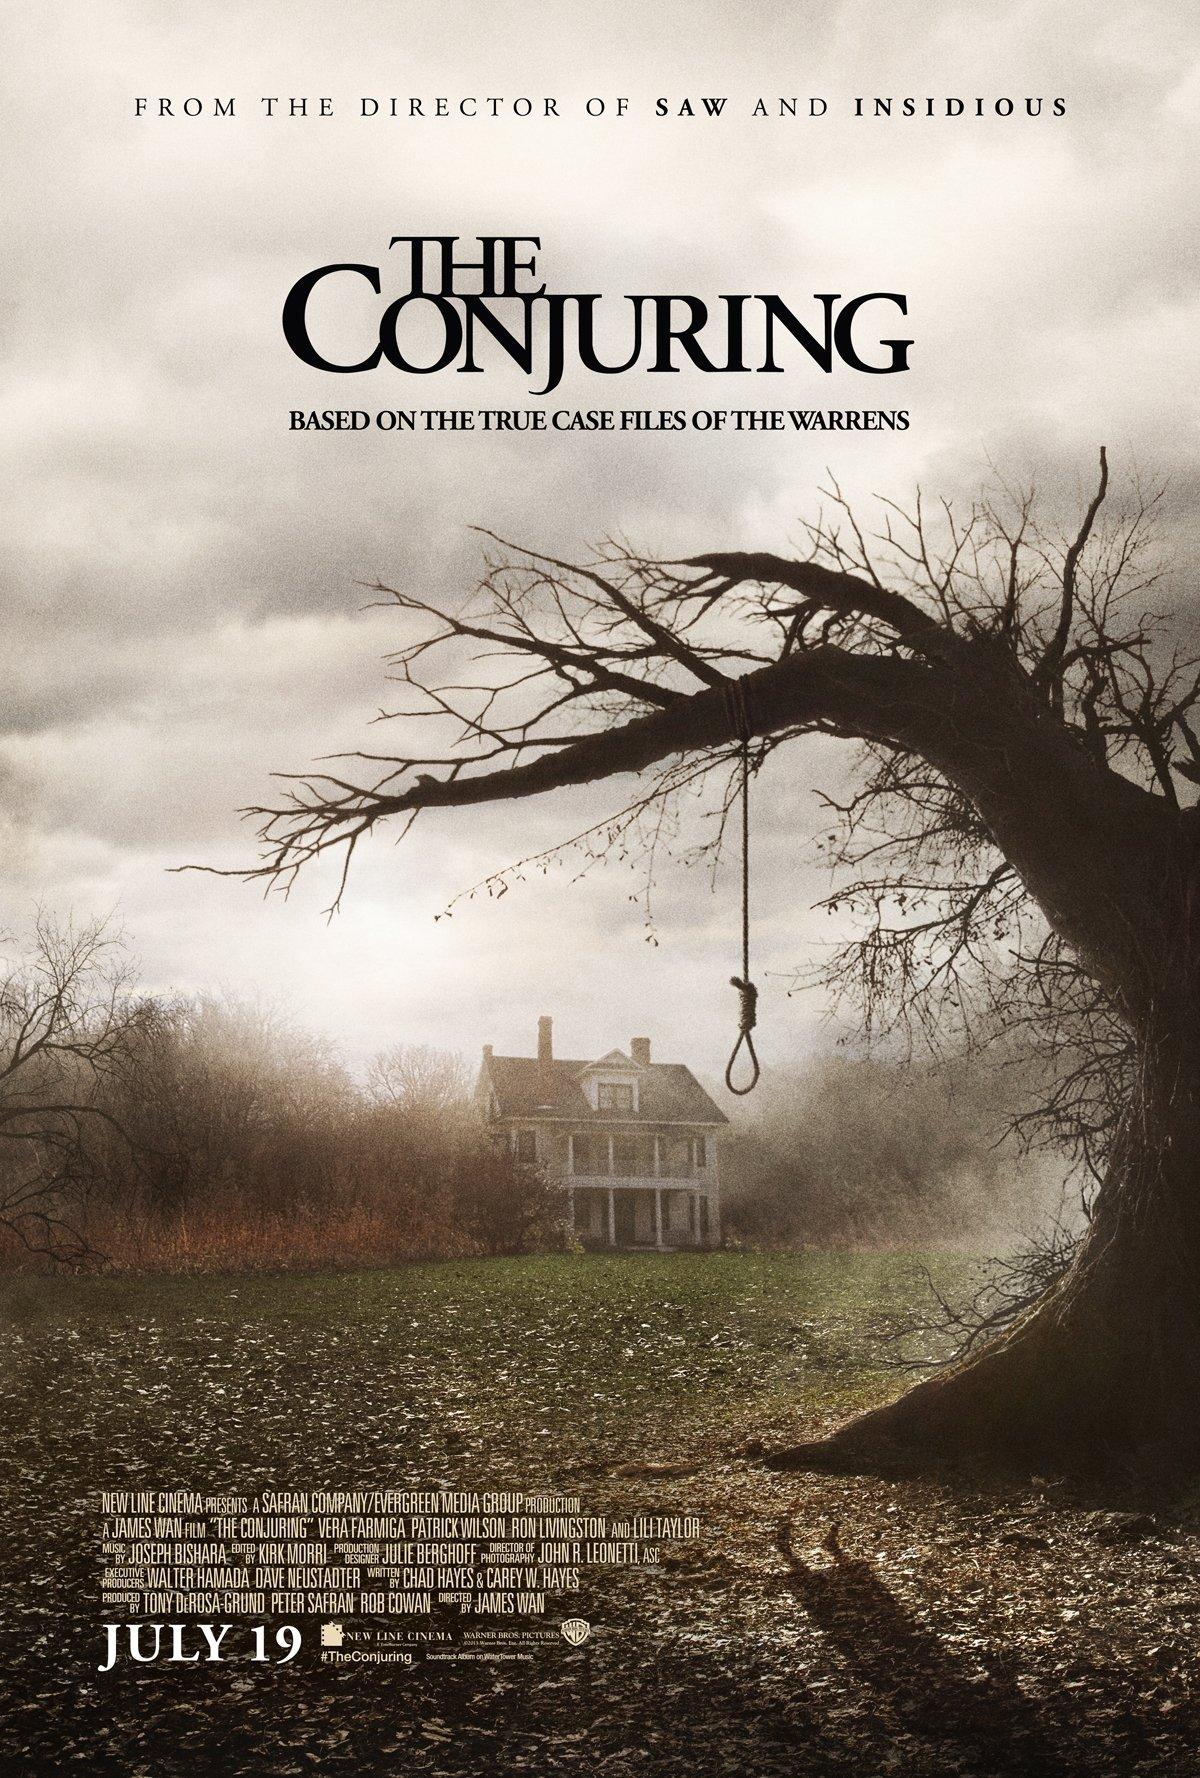 Poster phim The Conjuring (Ảnh: Internet)